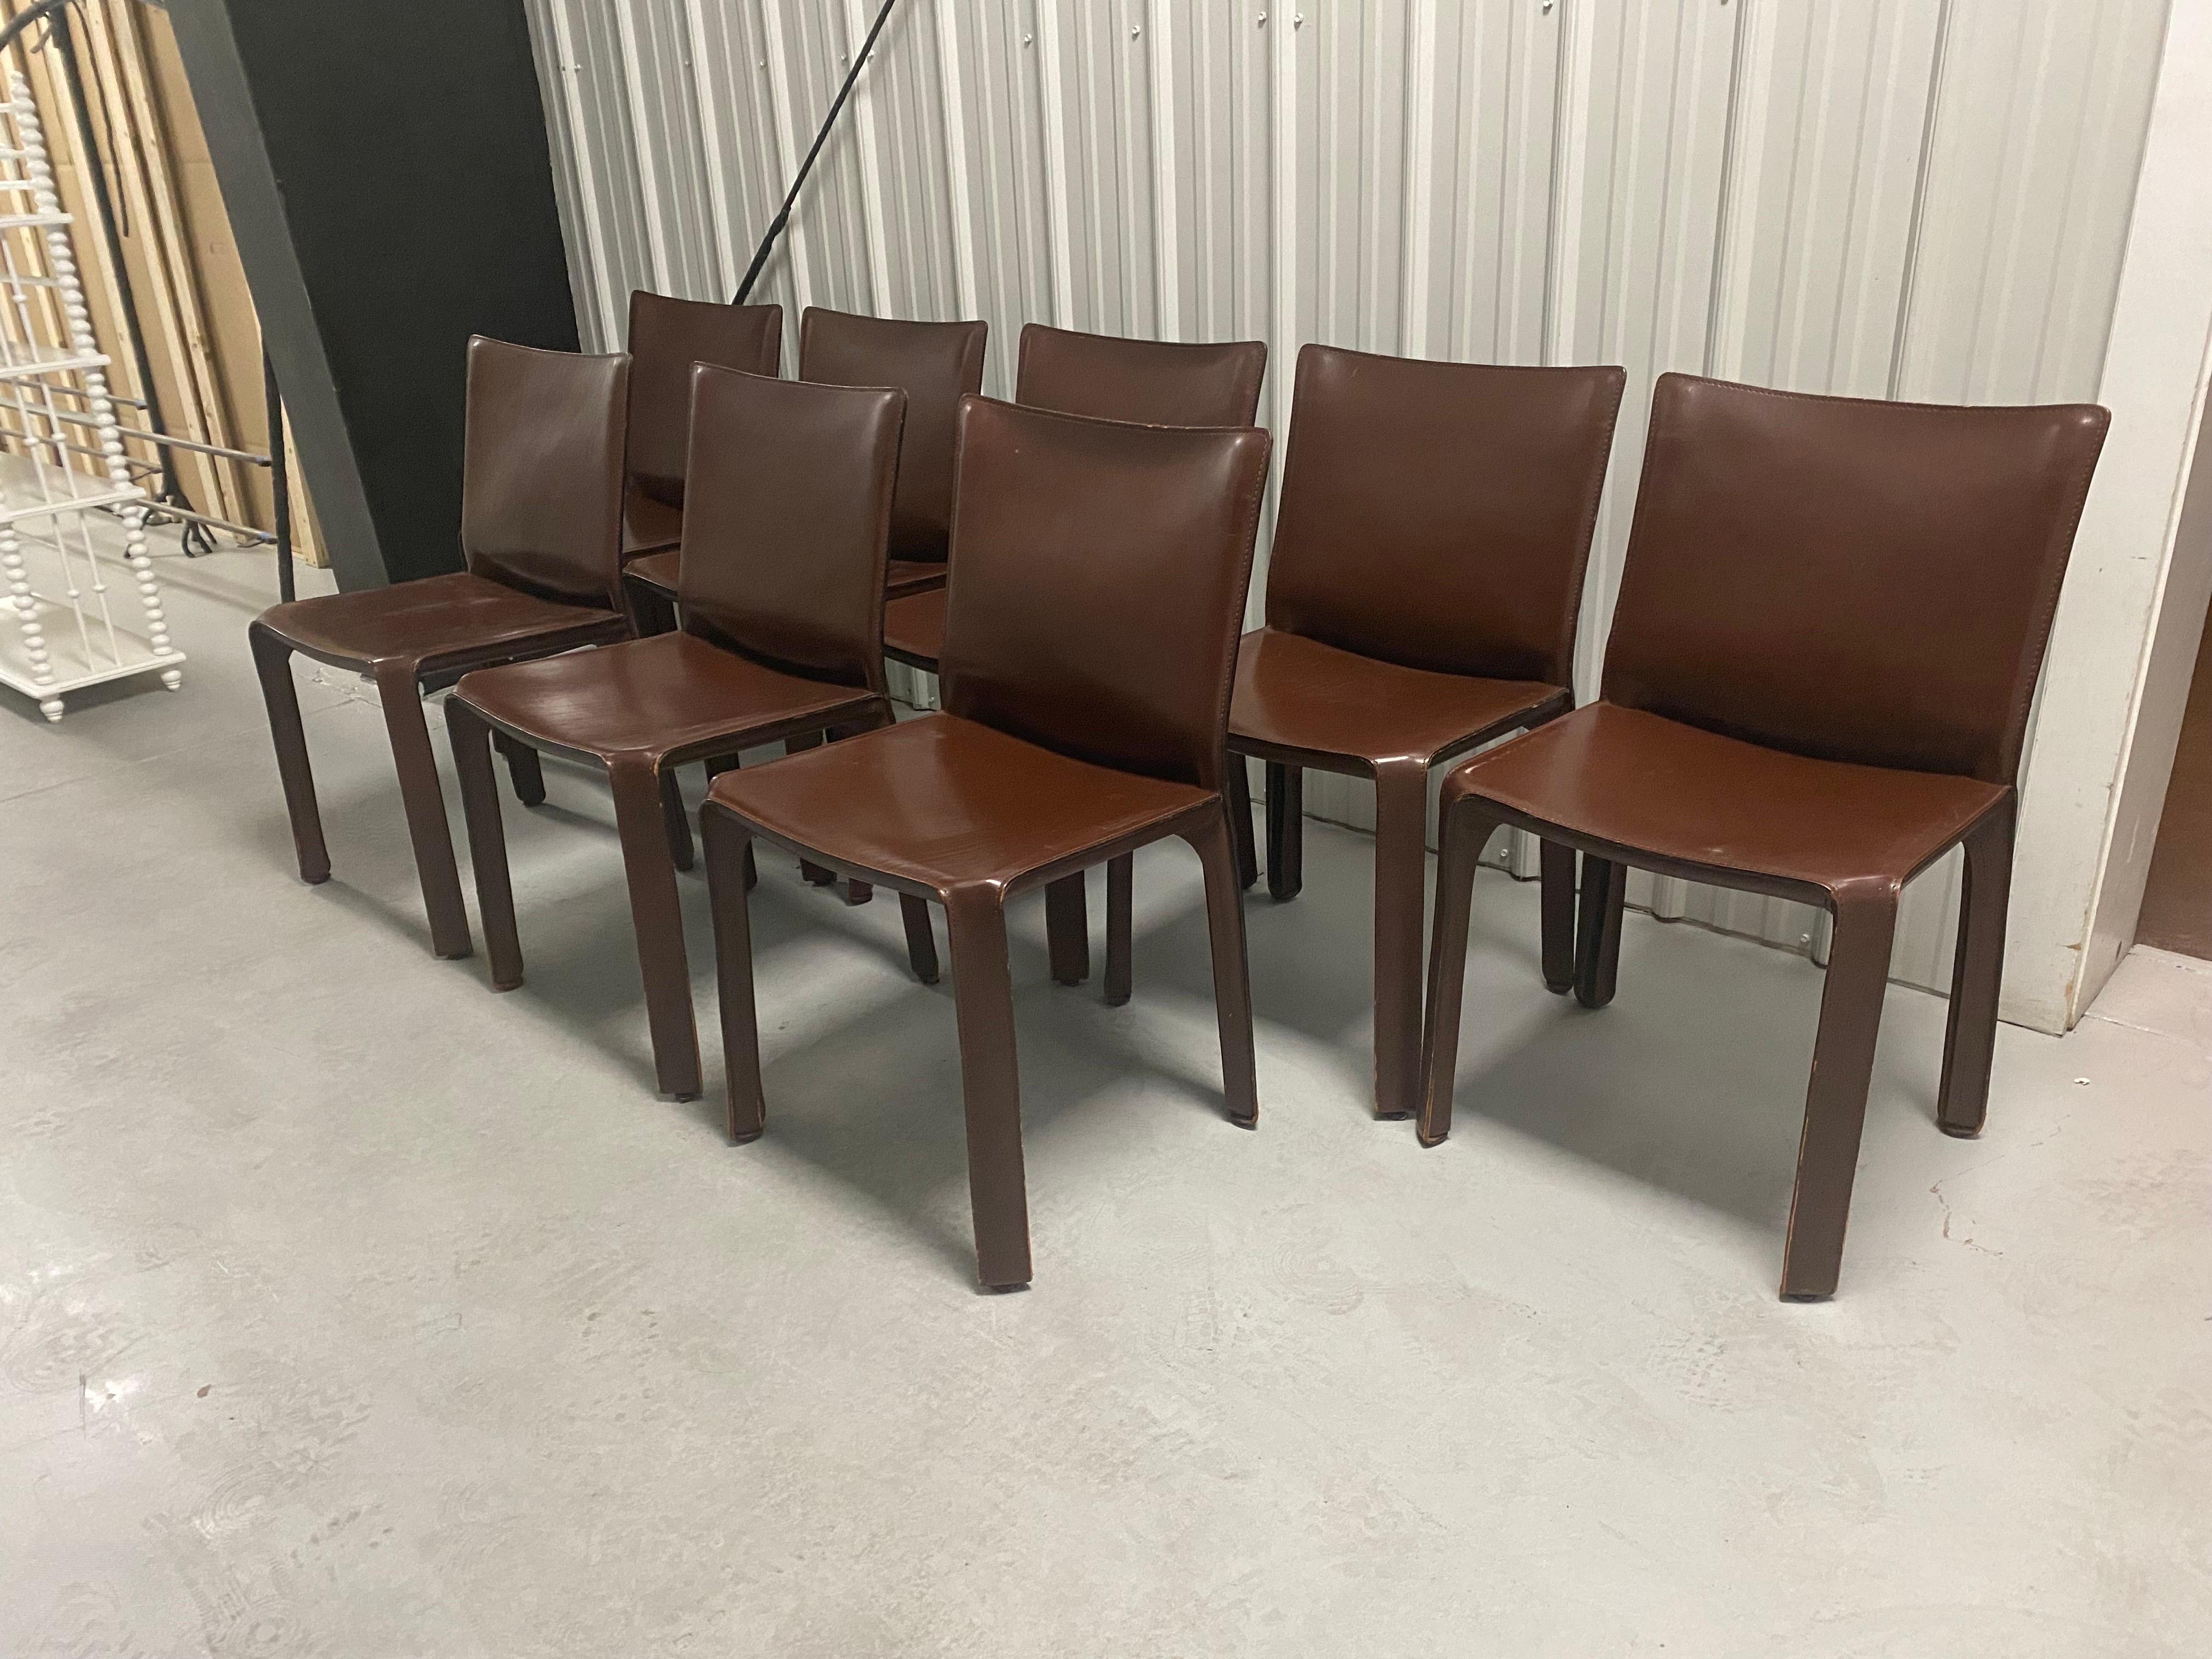 Beautiful set of eight Cab Chairs in leather hide, designed by Mario Bellini in 1976.
Manufactured by Cassina in circa 1990s. The set consists of eight cab 412 dining chairs covered in a dark brown mahogany color leather. 